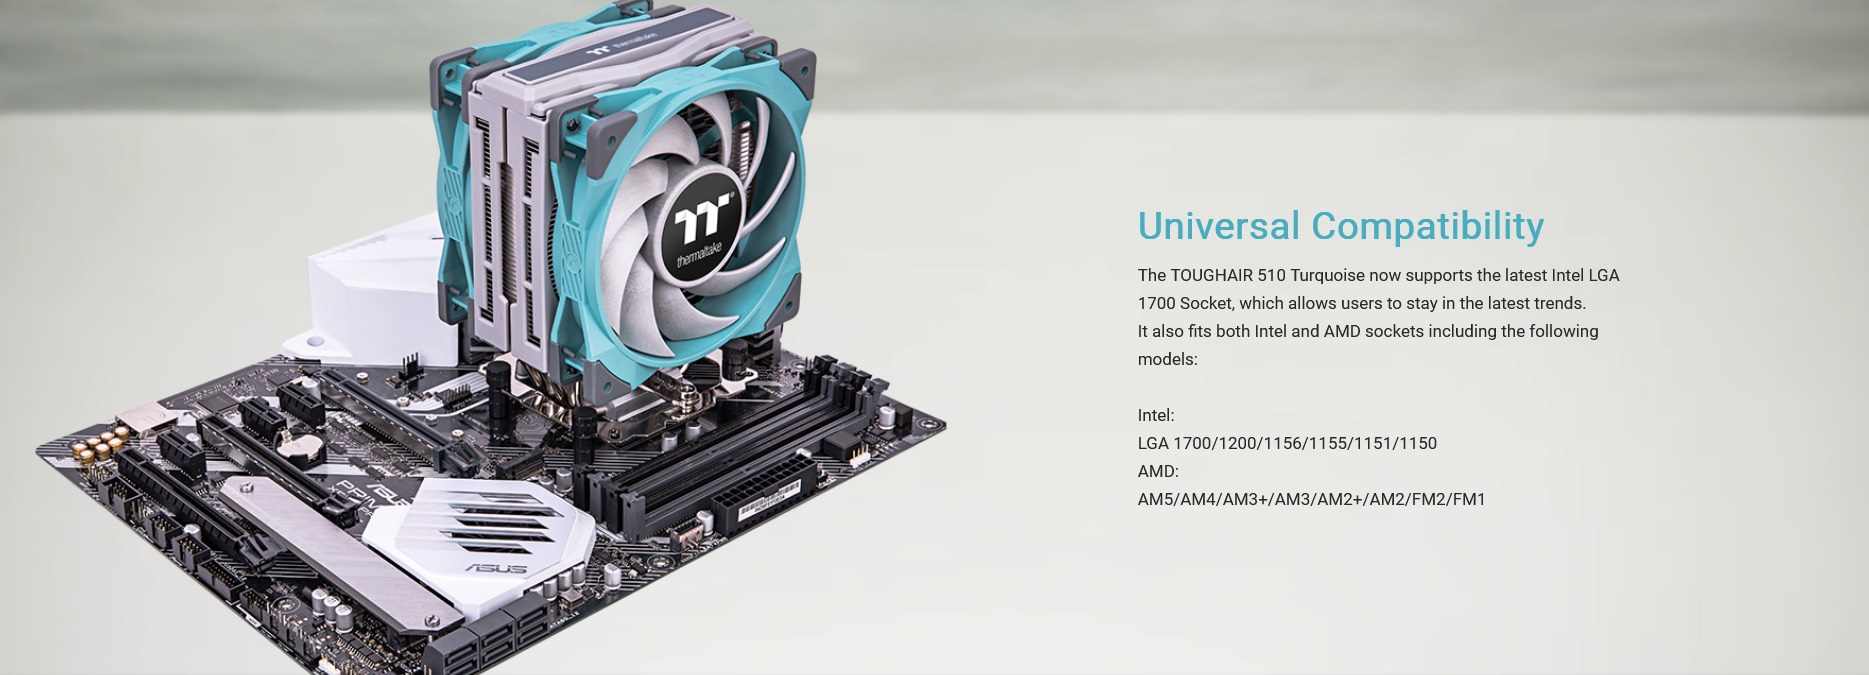 A large marketing image providing additional information about the product Thermaltake Toughair 510 - Dual Fan CPU Cooler (Turquoise) - Additional alt info not provided